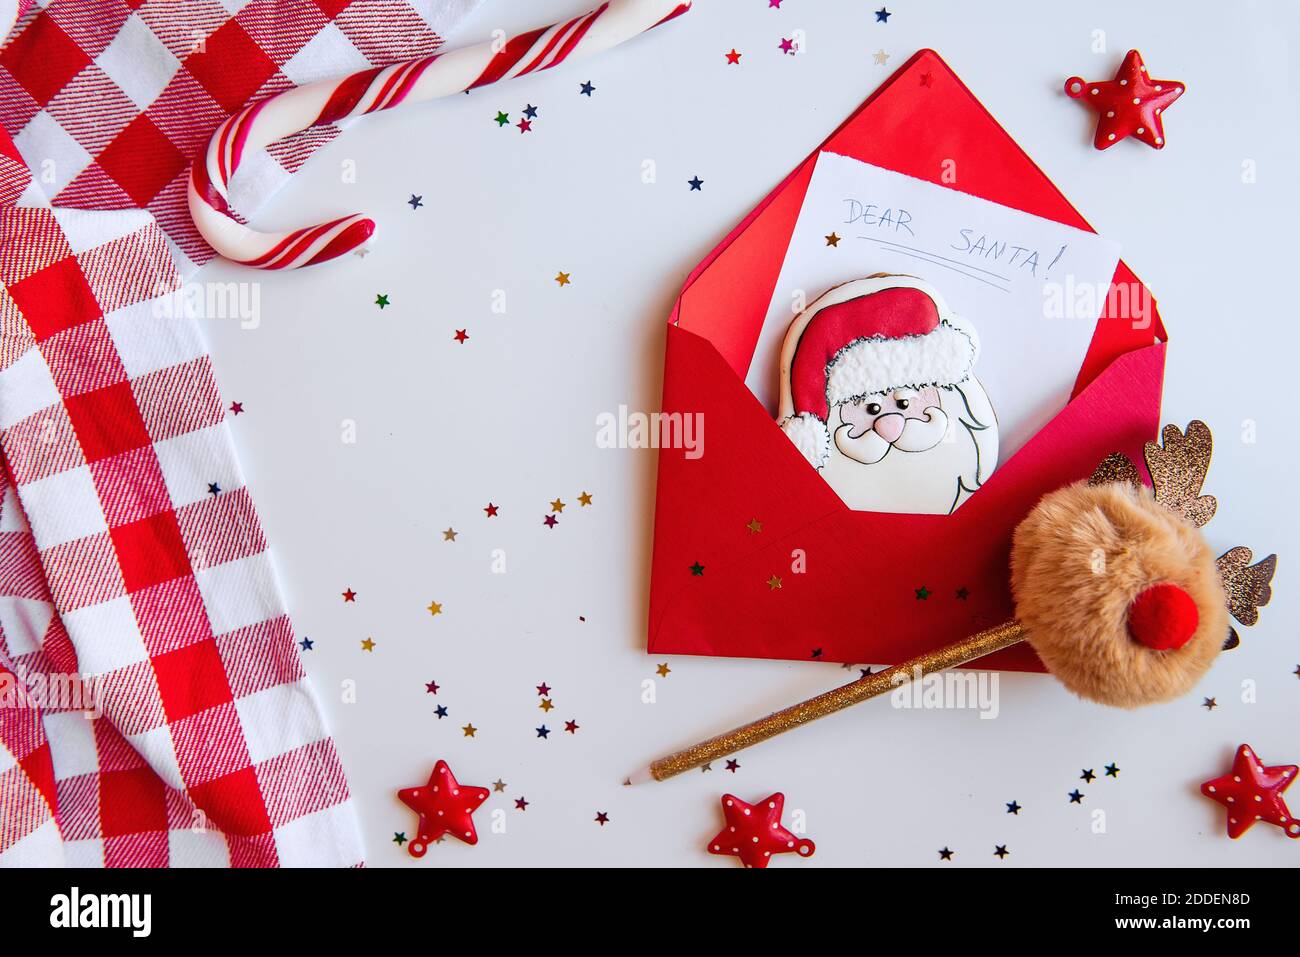 Flatlay New Year's in white and red colors. Christmas card with stars confetti. A letter to Santa Claus with a gingerbread cookie. Deer pom-pom handle Stock Photo